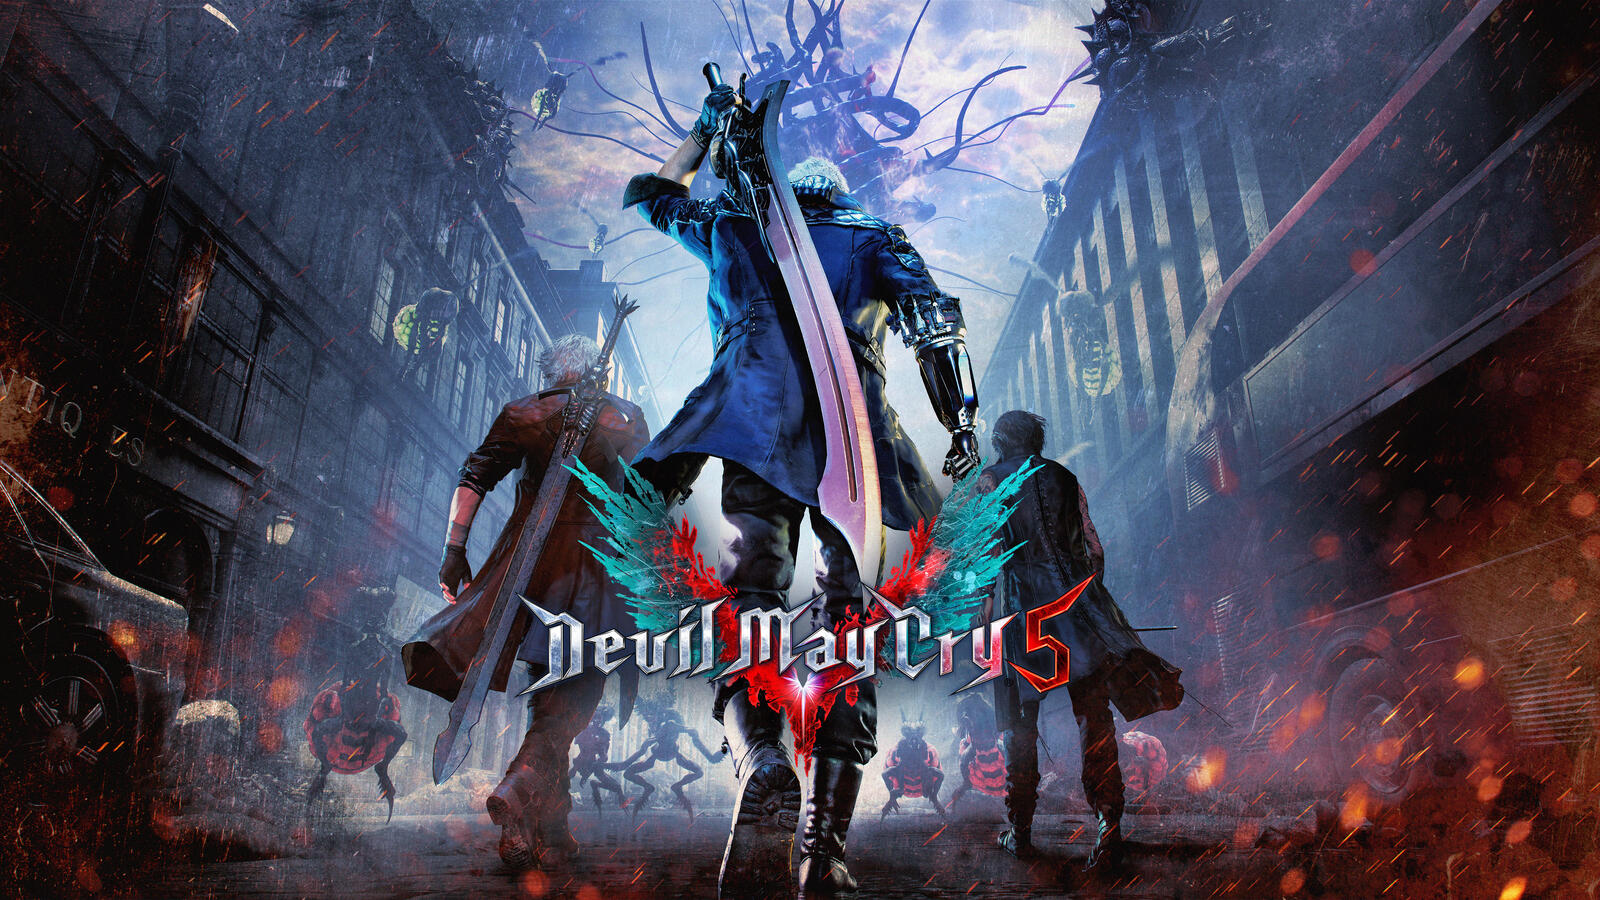 Wallpapers devil may cry 5 screensaver games on the desktop